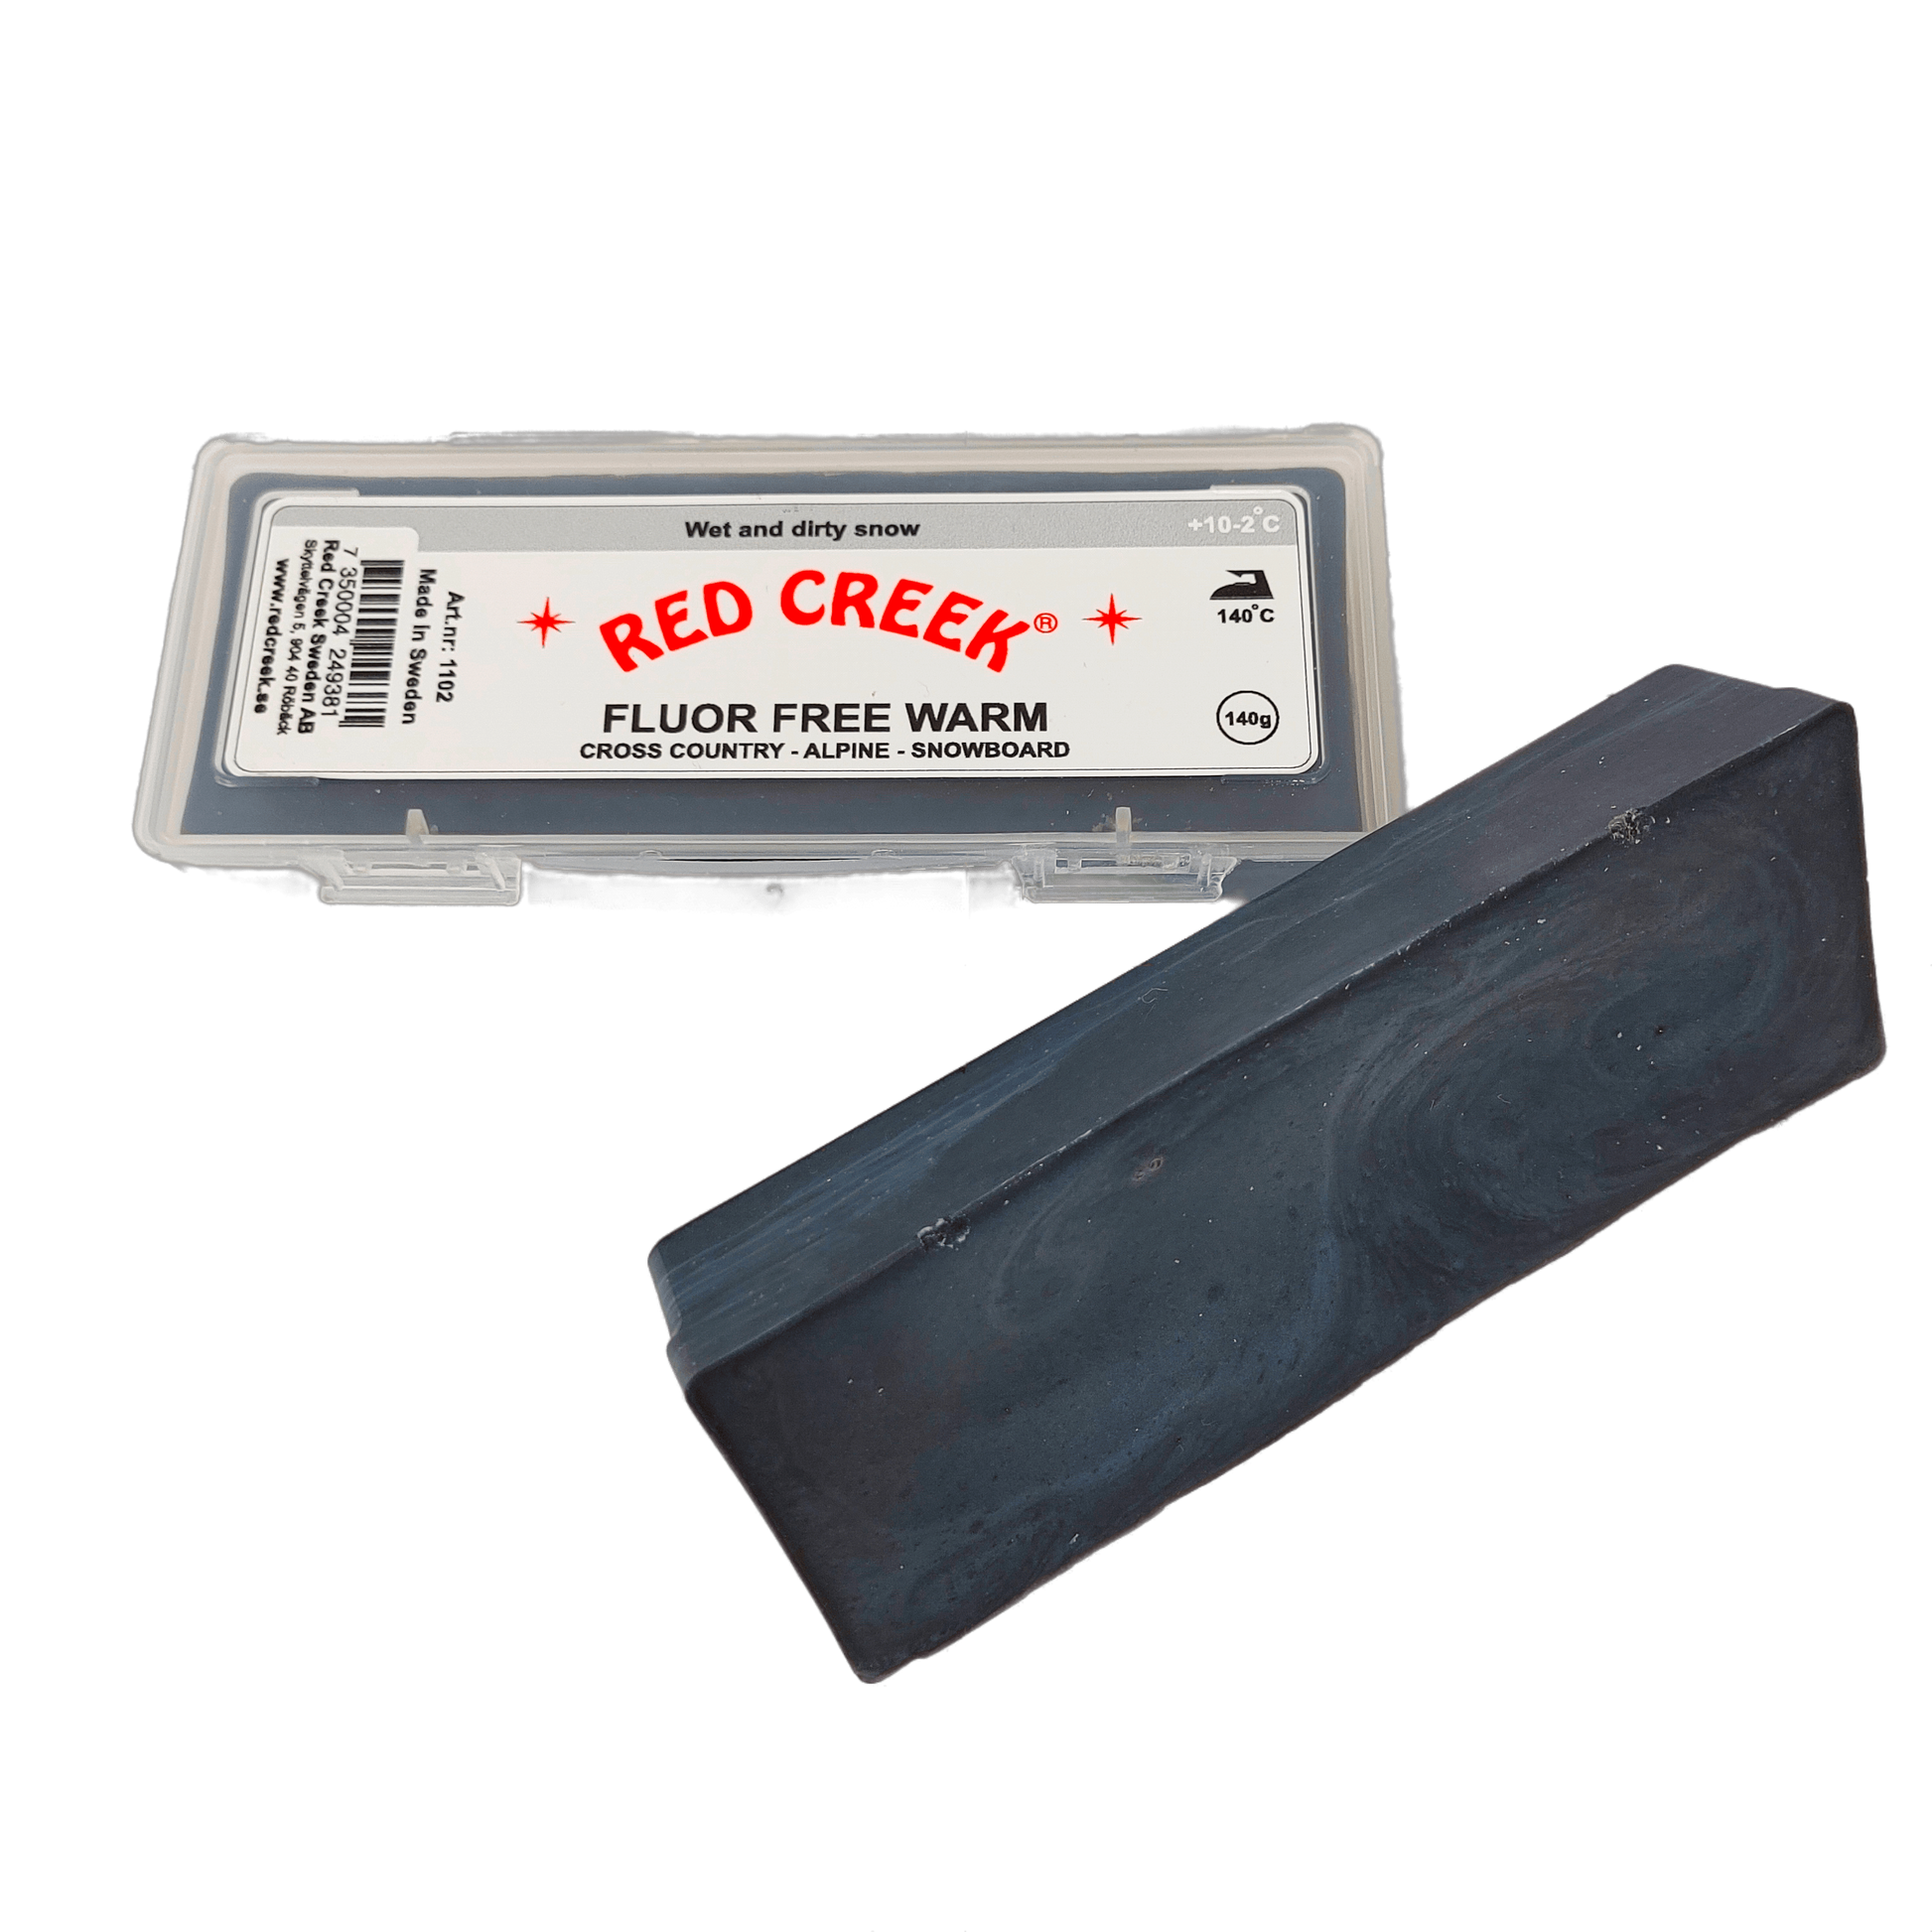 A product picture of the Red Creek Fluoro-Free Warm Paraffin